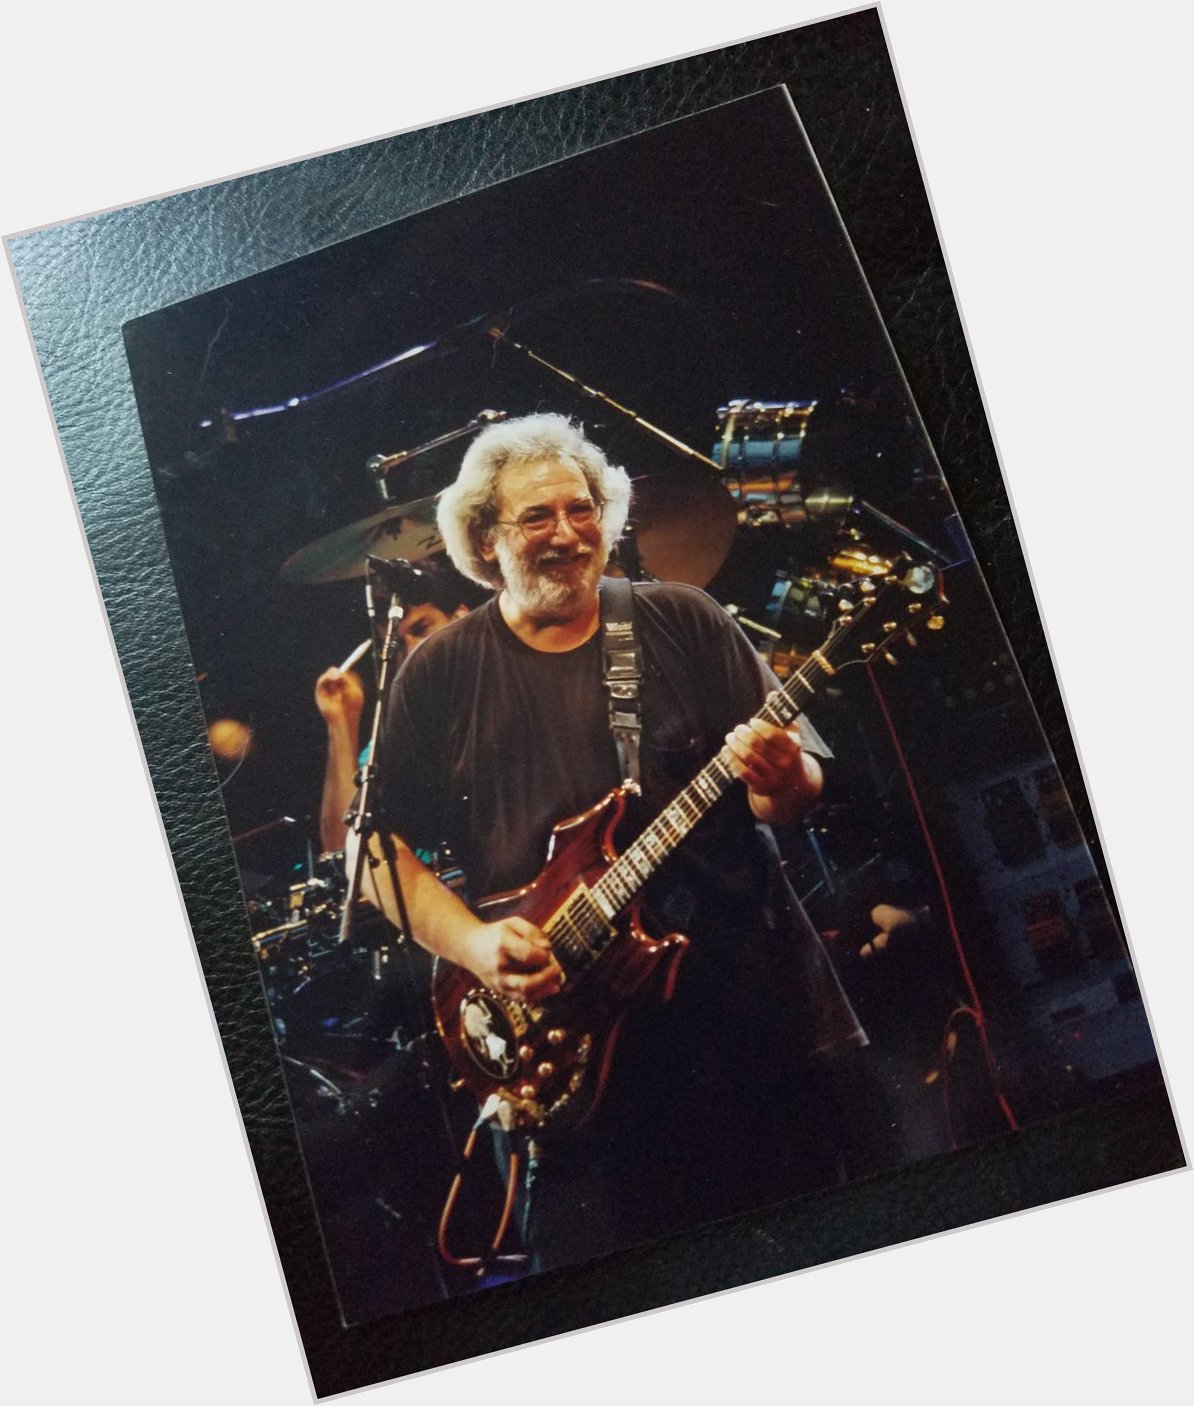 Happy birthday Jerry Garcia!
One of the few pictures I took of Jerry Garcia. He turned to me and smiled! 